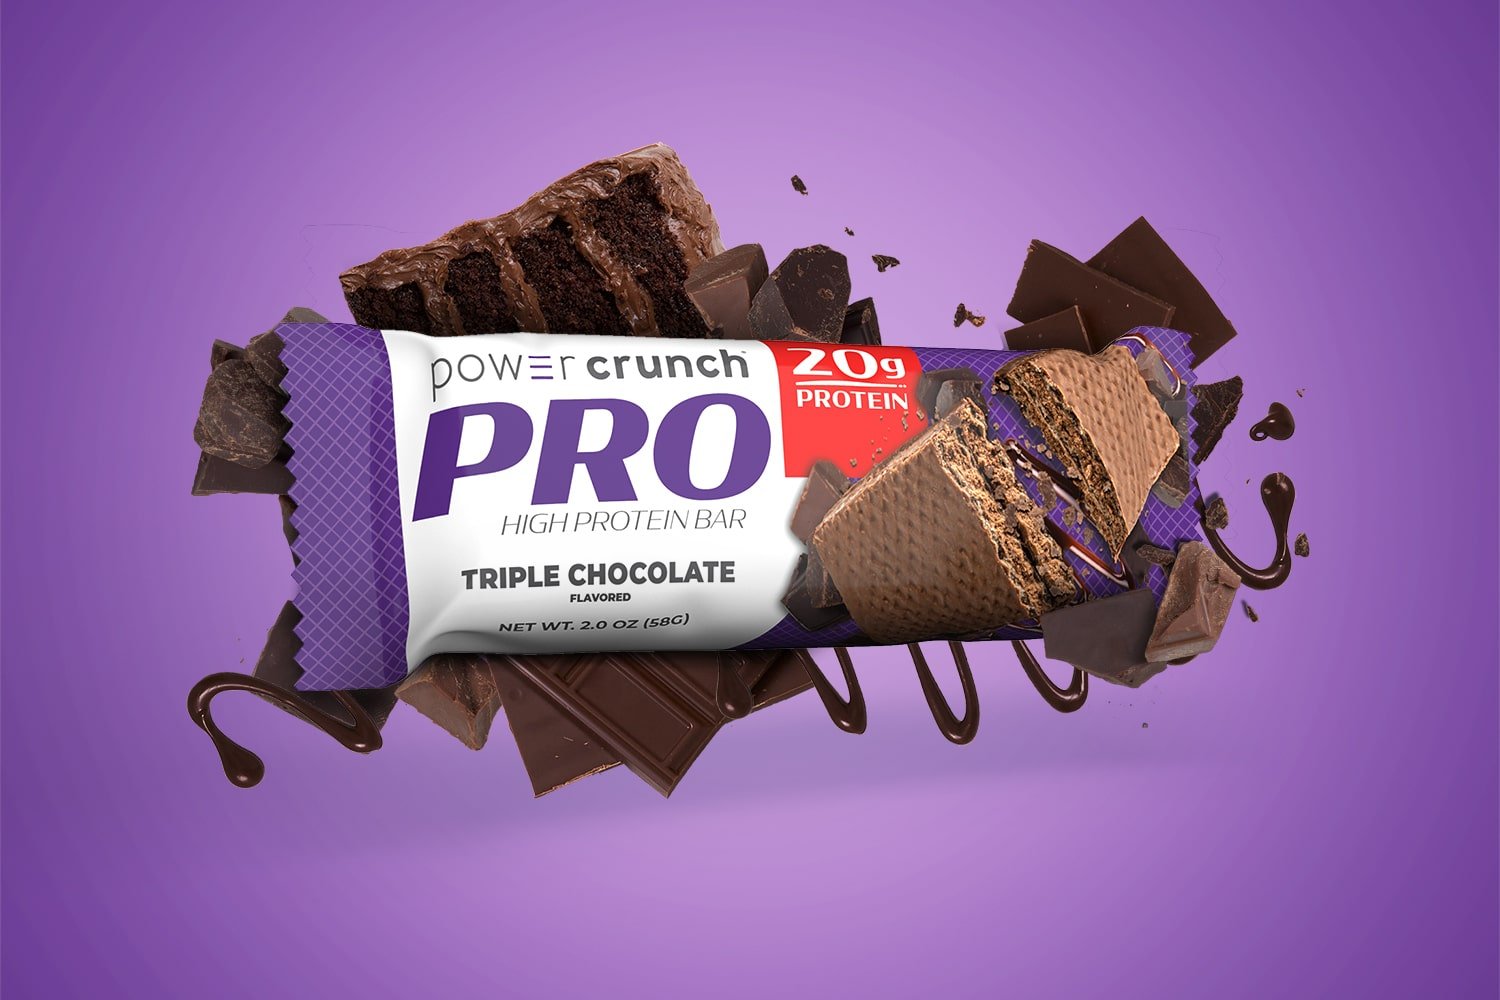 PRO Triple Chocolate 20g protein bars pictured with Triple Chocolate flavor explosion